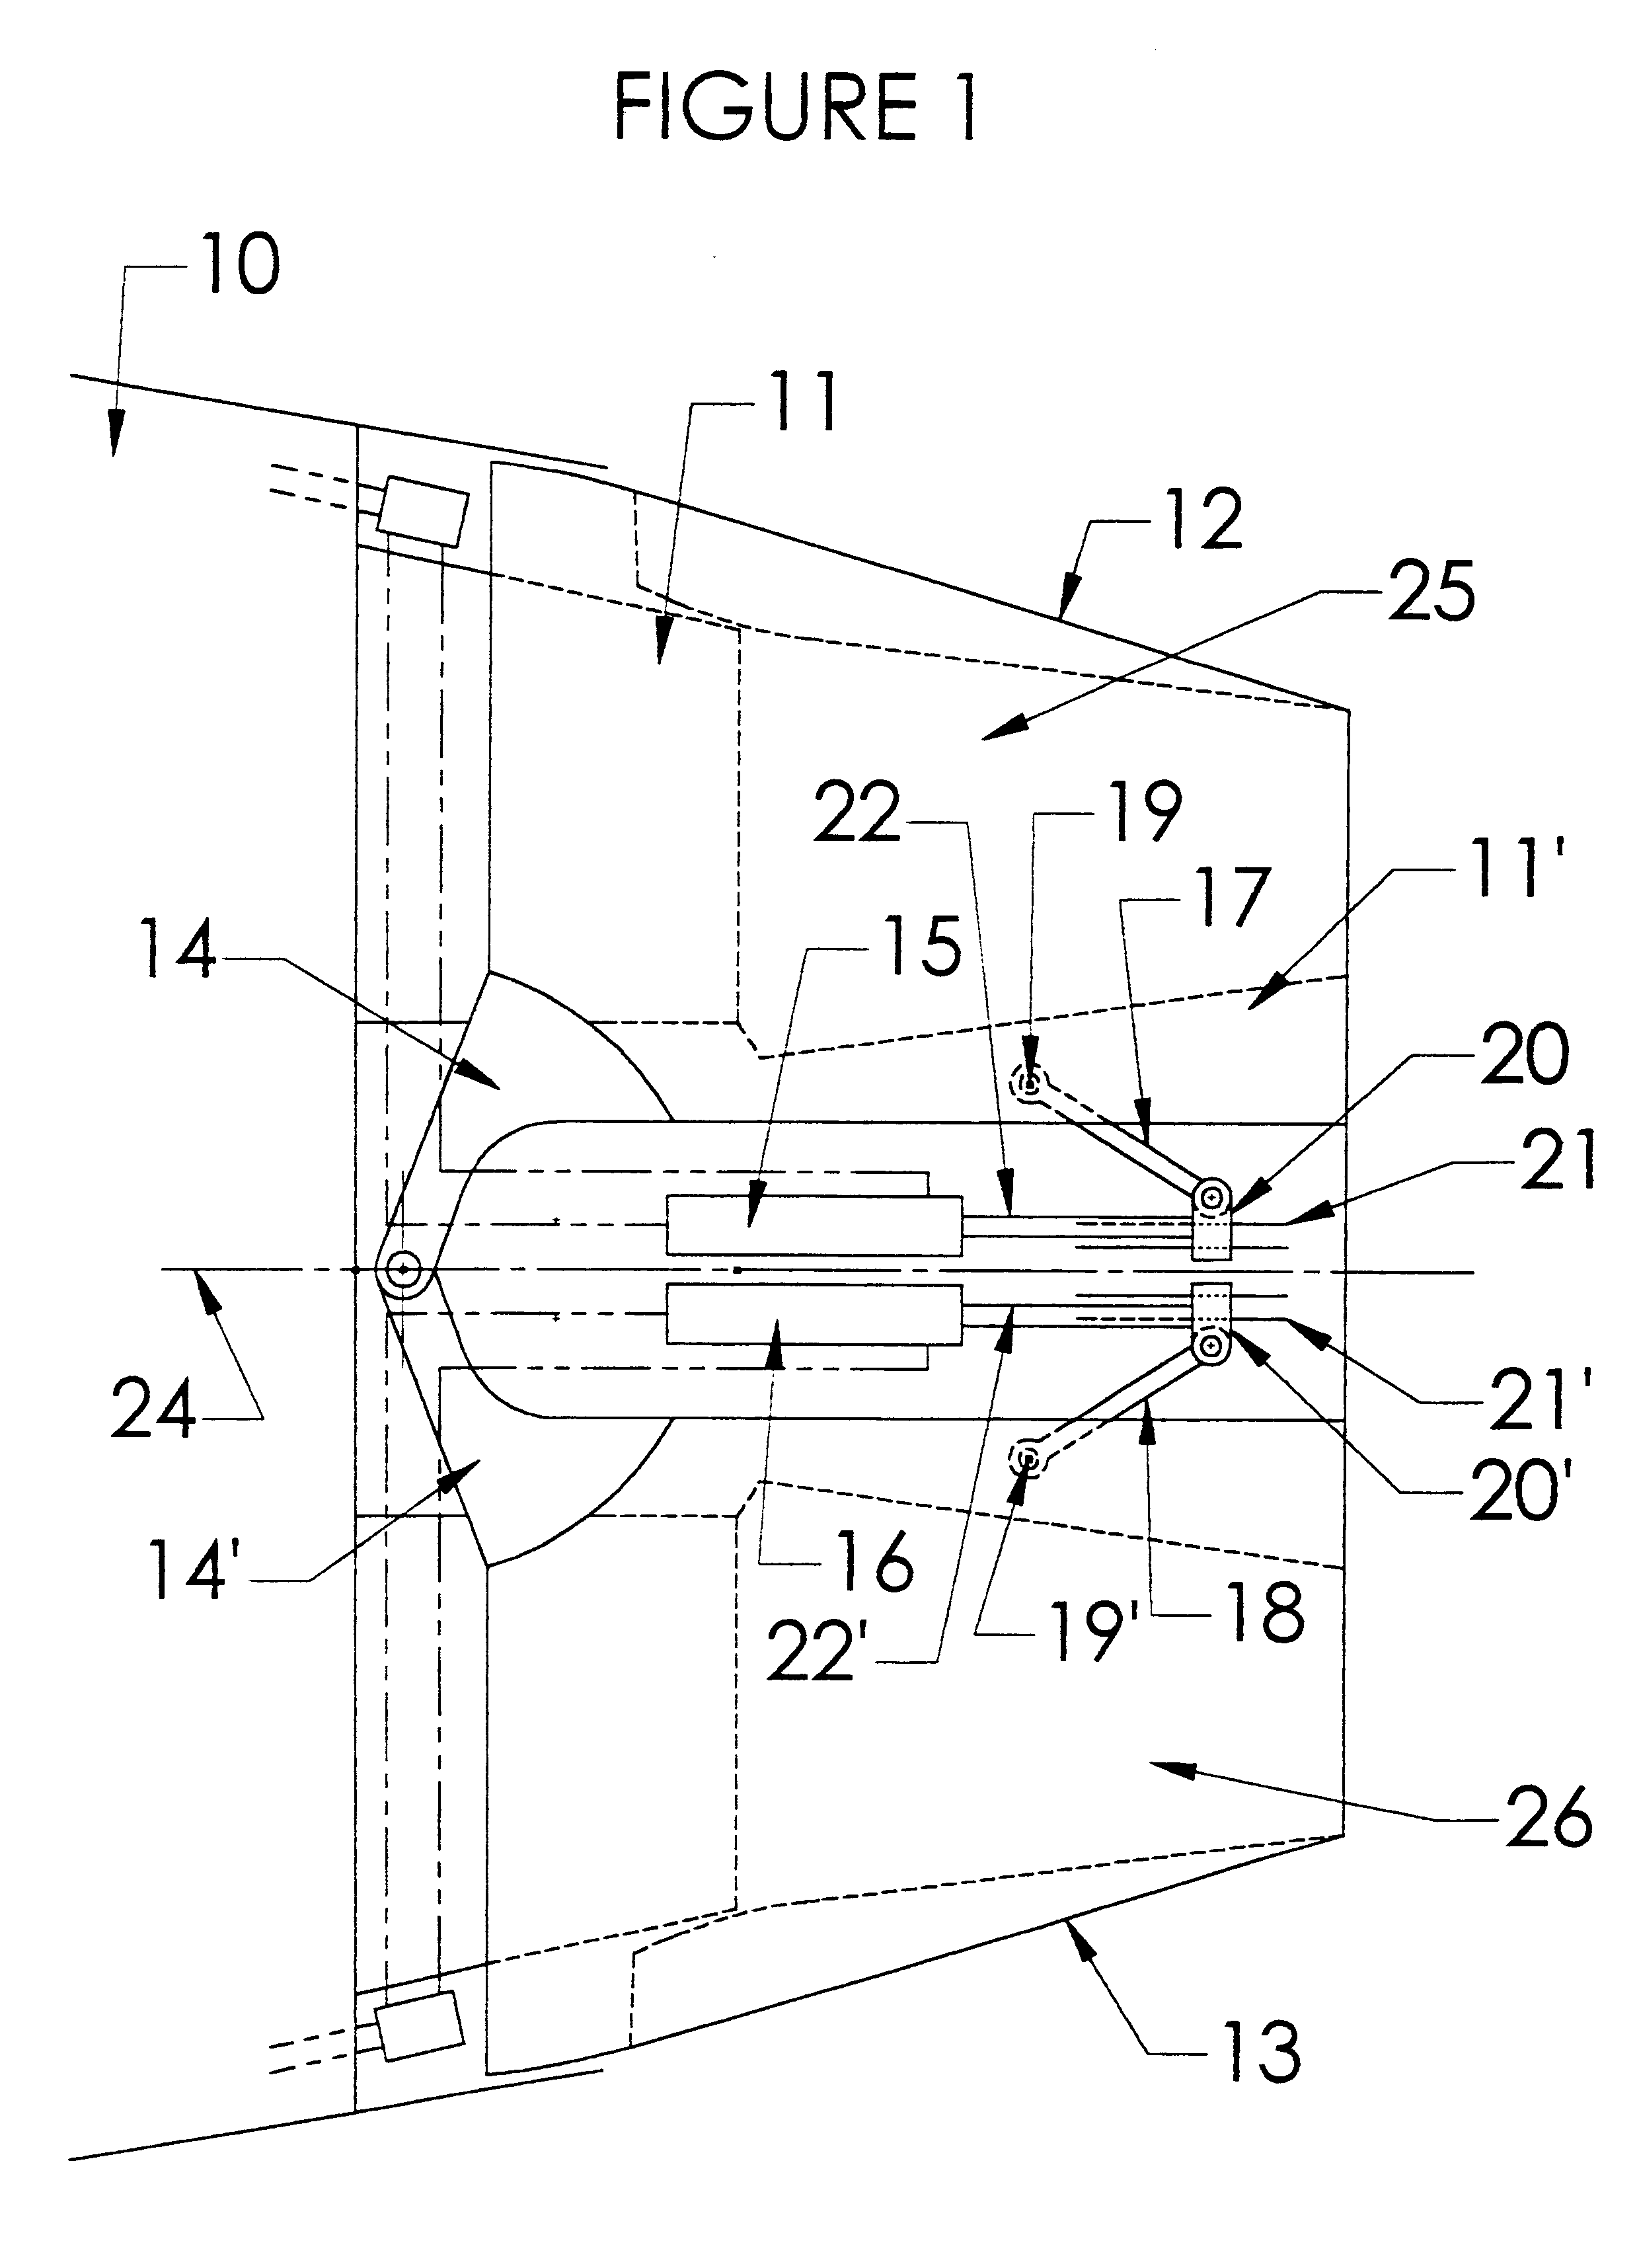 Jet engine nozzle with variable thrust vectoring and exhaust area